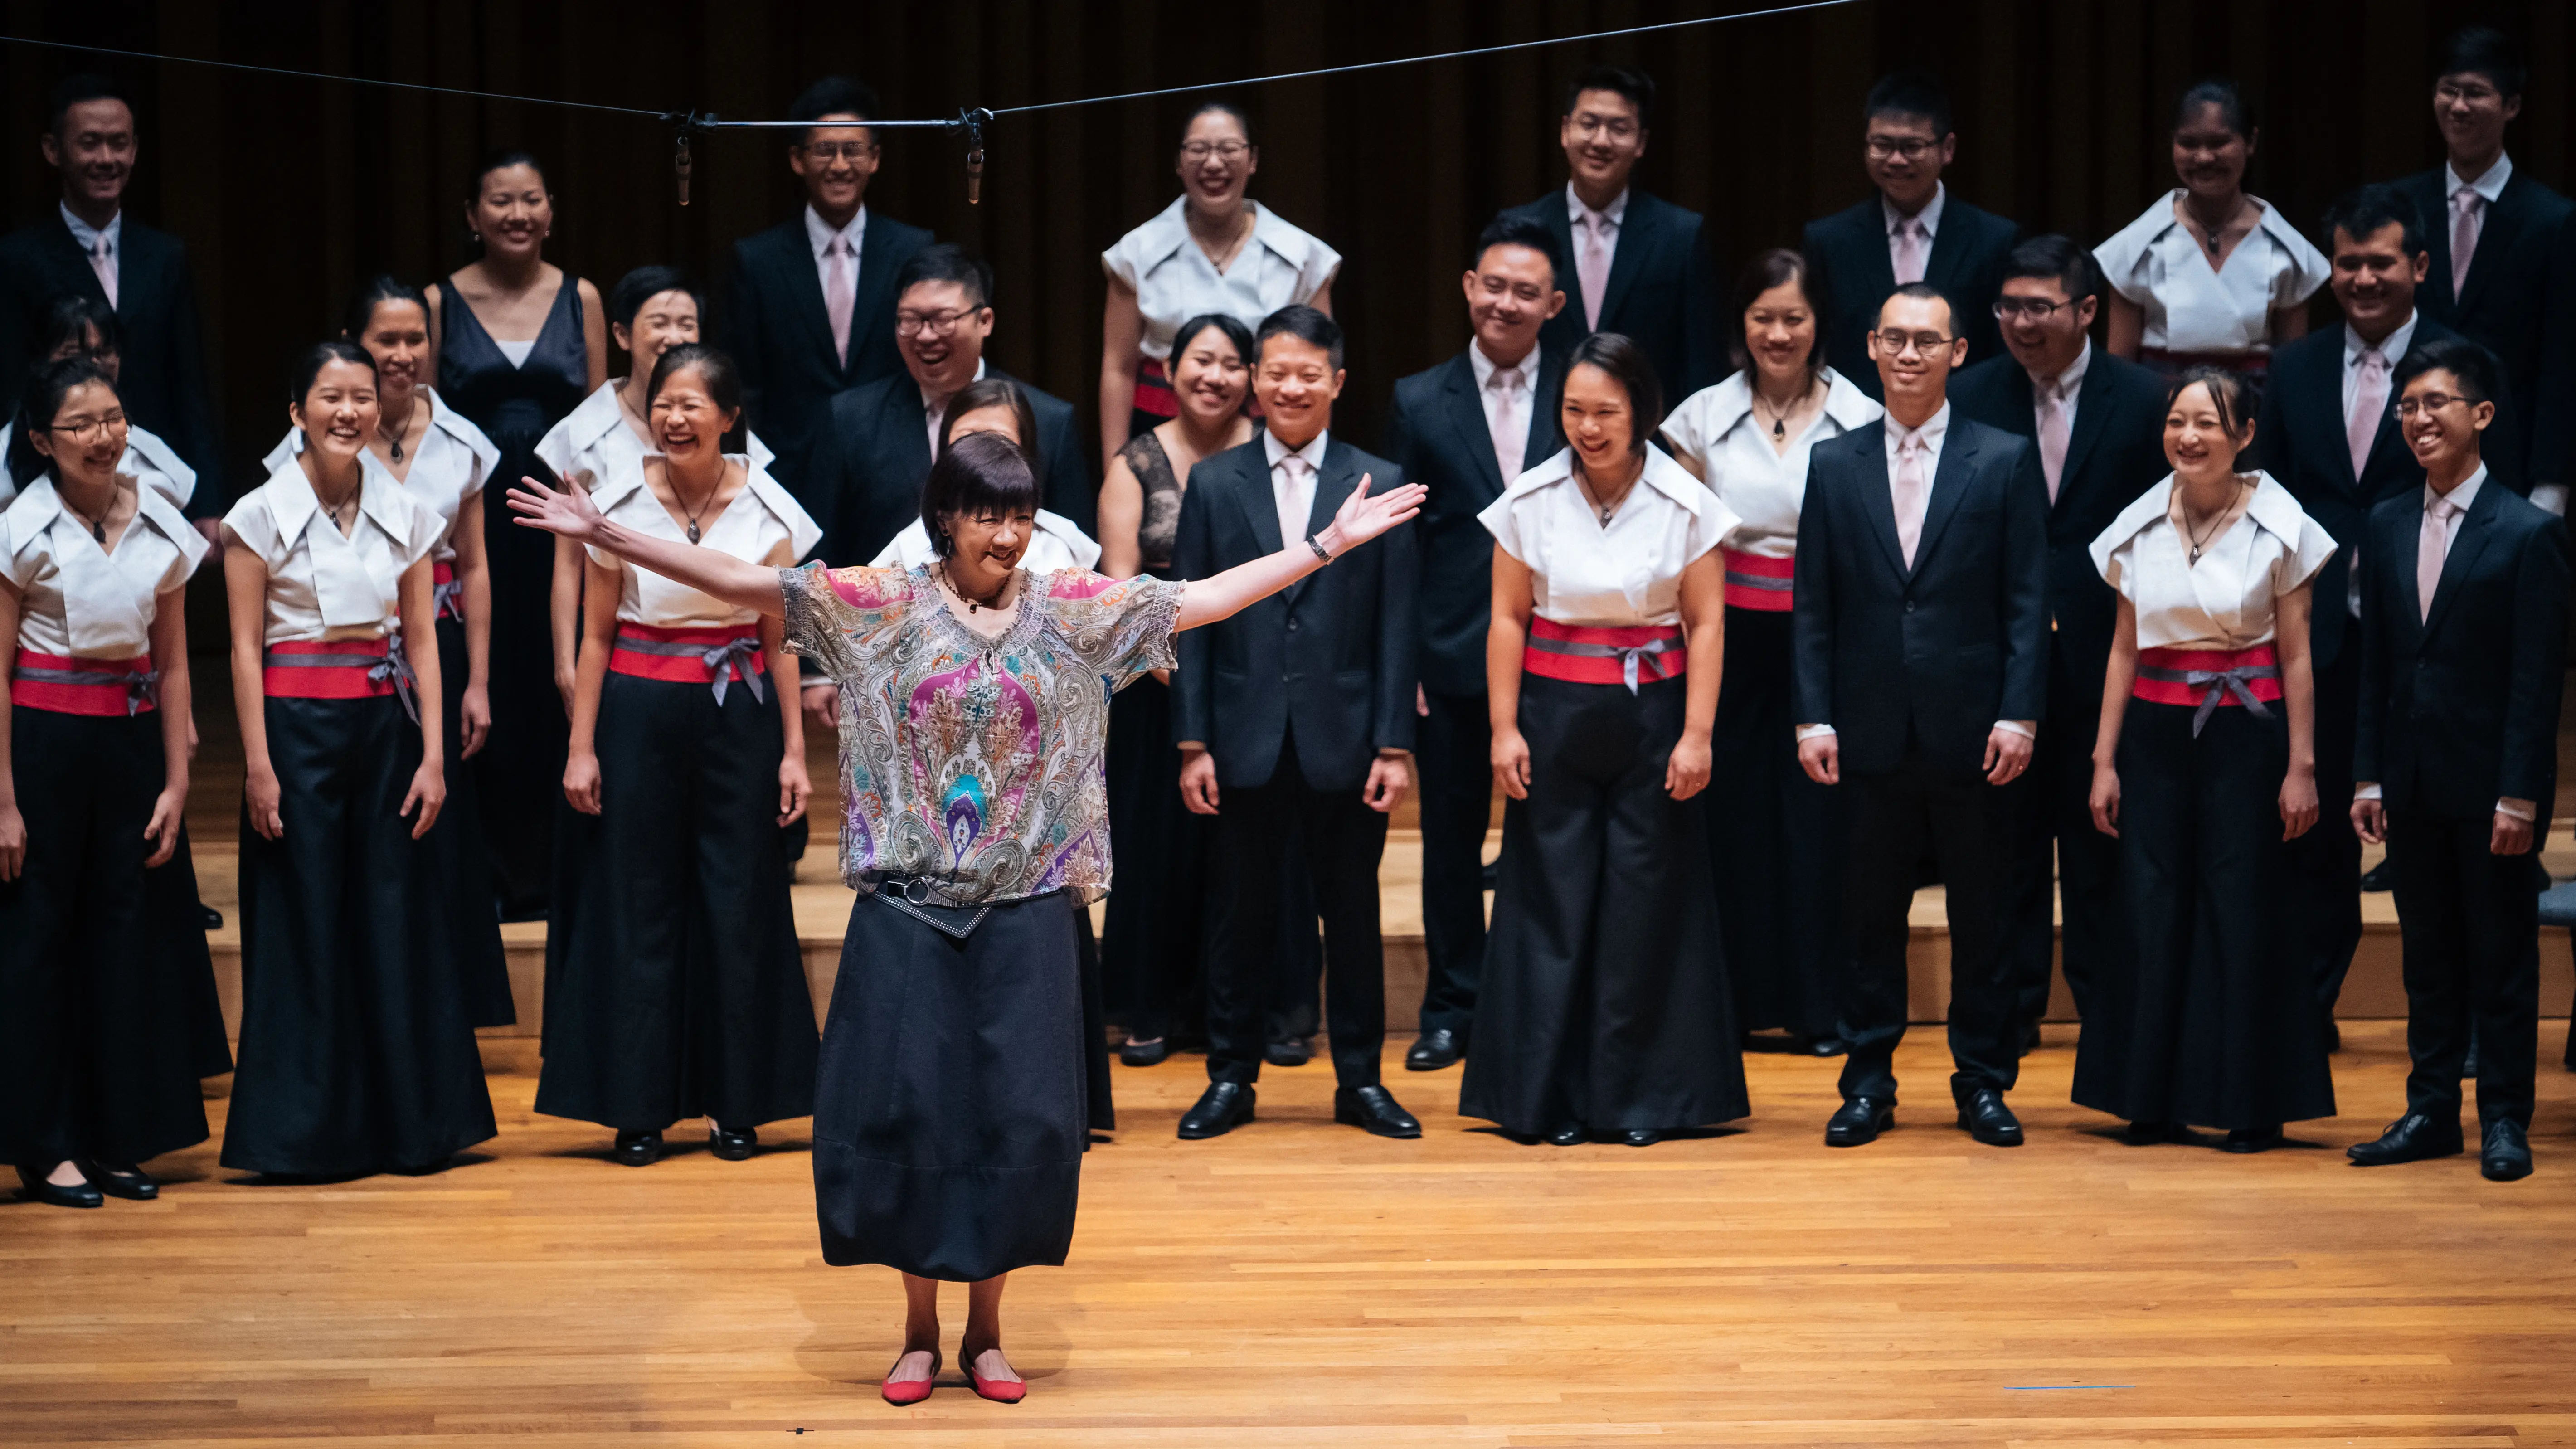 image of choir and conductor facing the audience at a concert